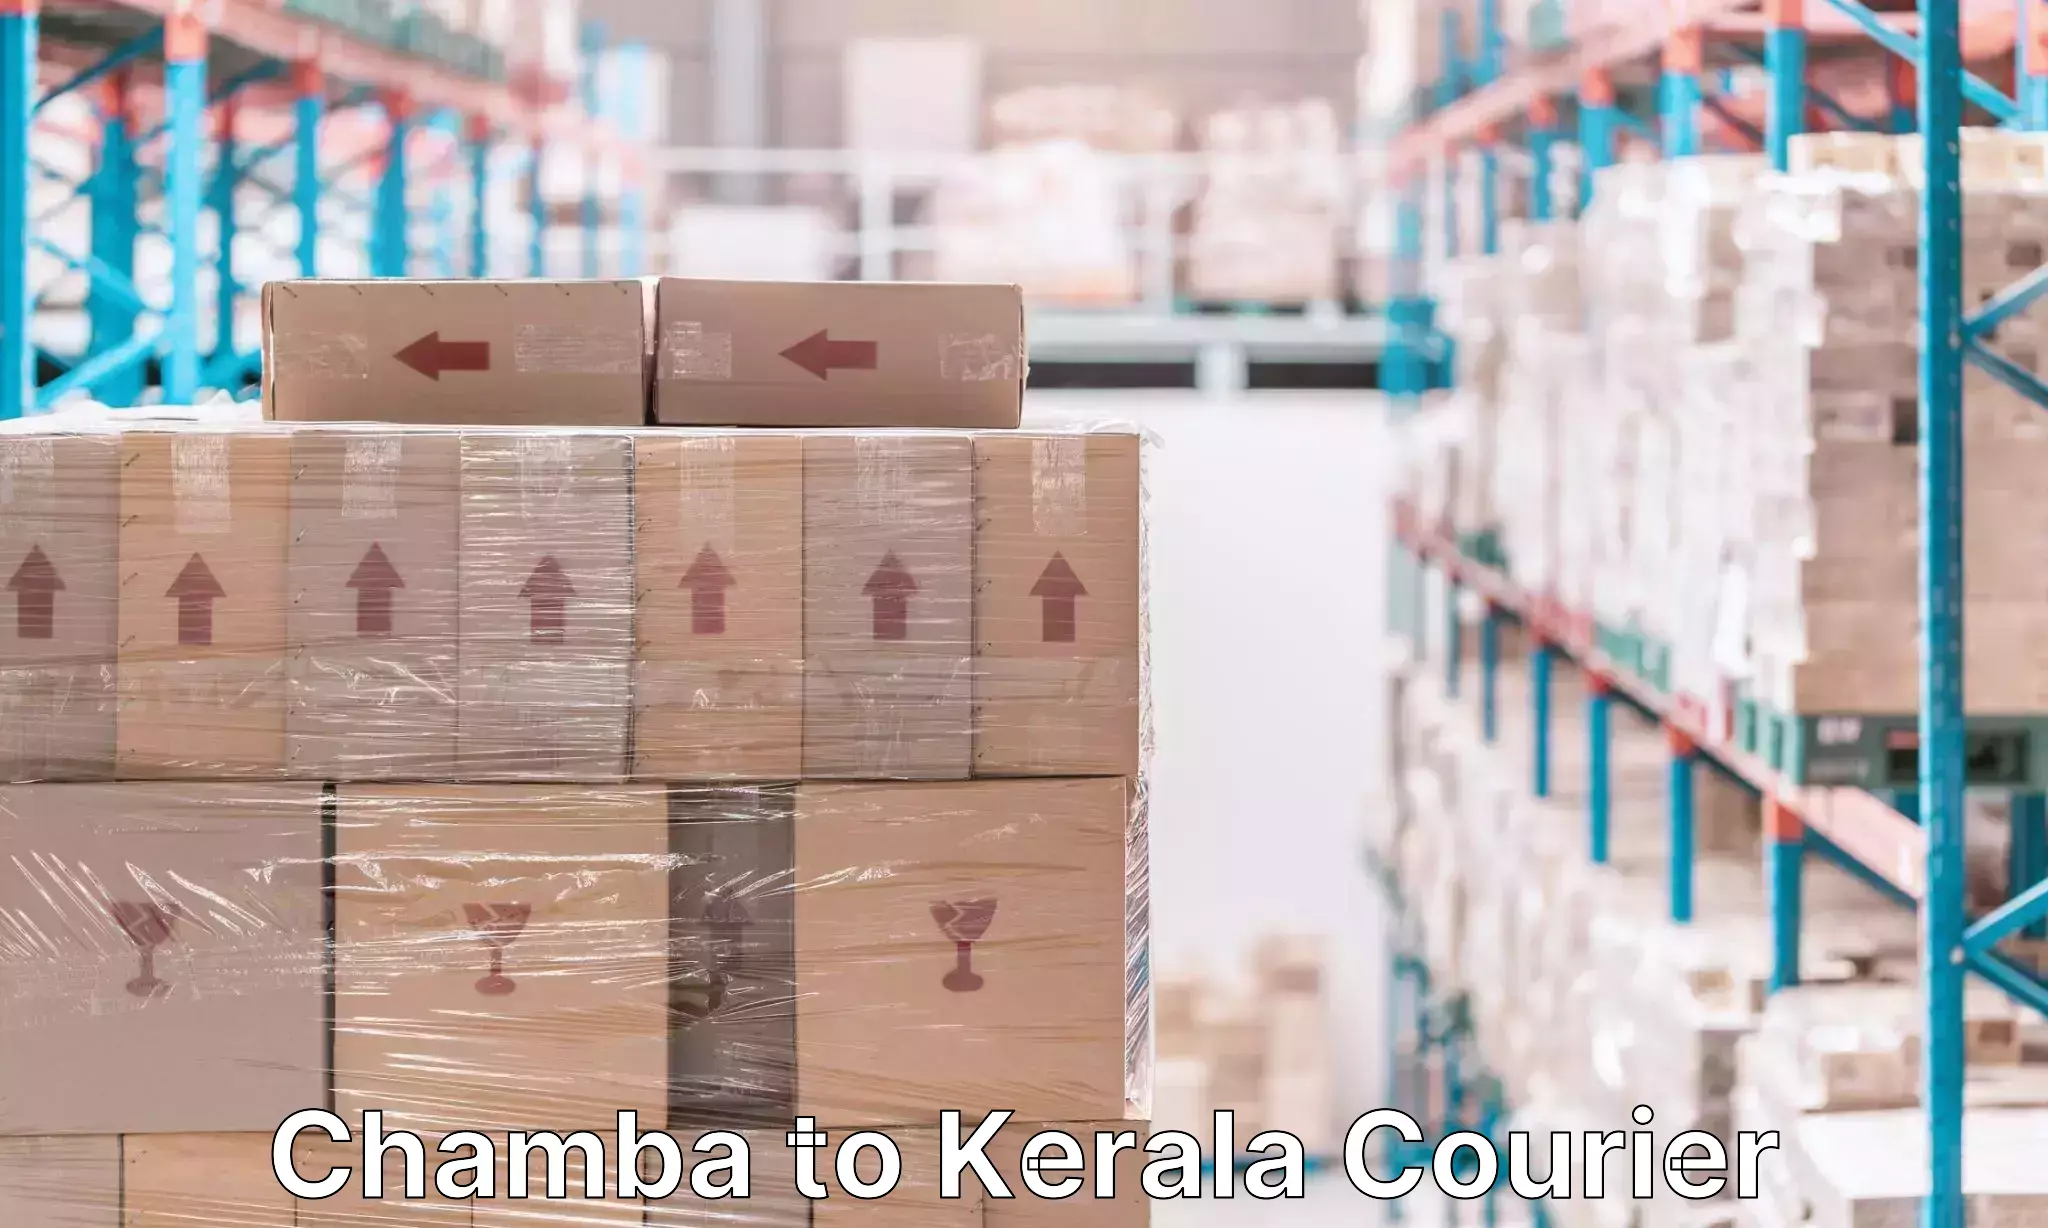 Luggage delivery app Chamba to Kerala